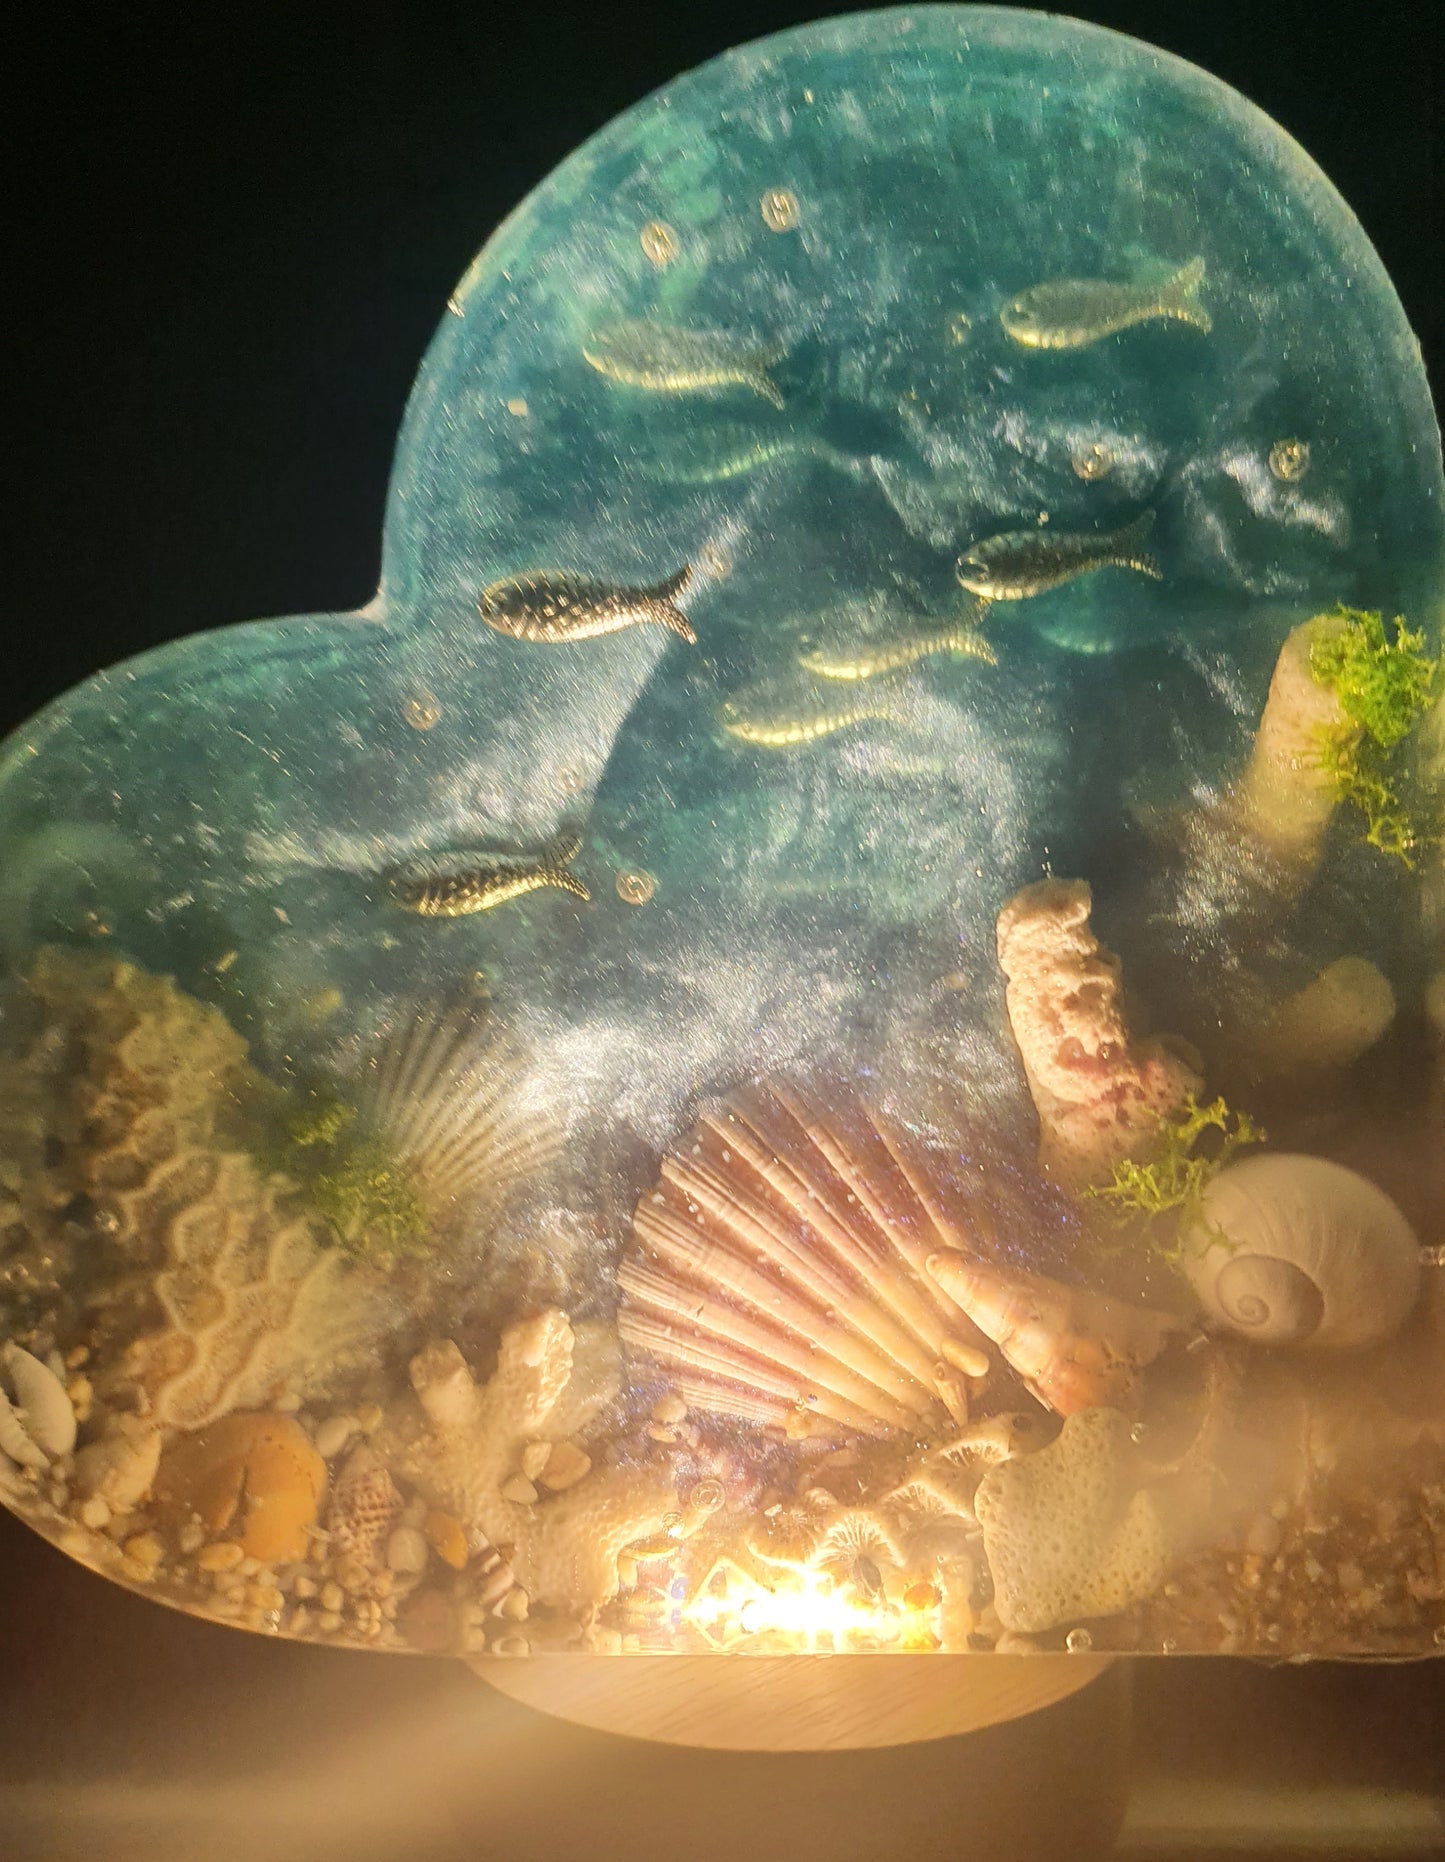 Seascape lamp/ bookend/ table art - spawning coral seascape with Stirling silver fish